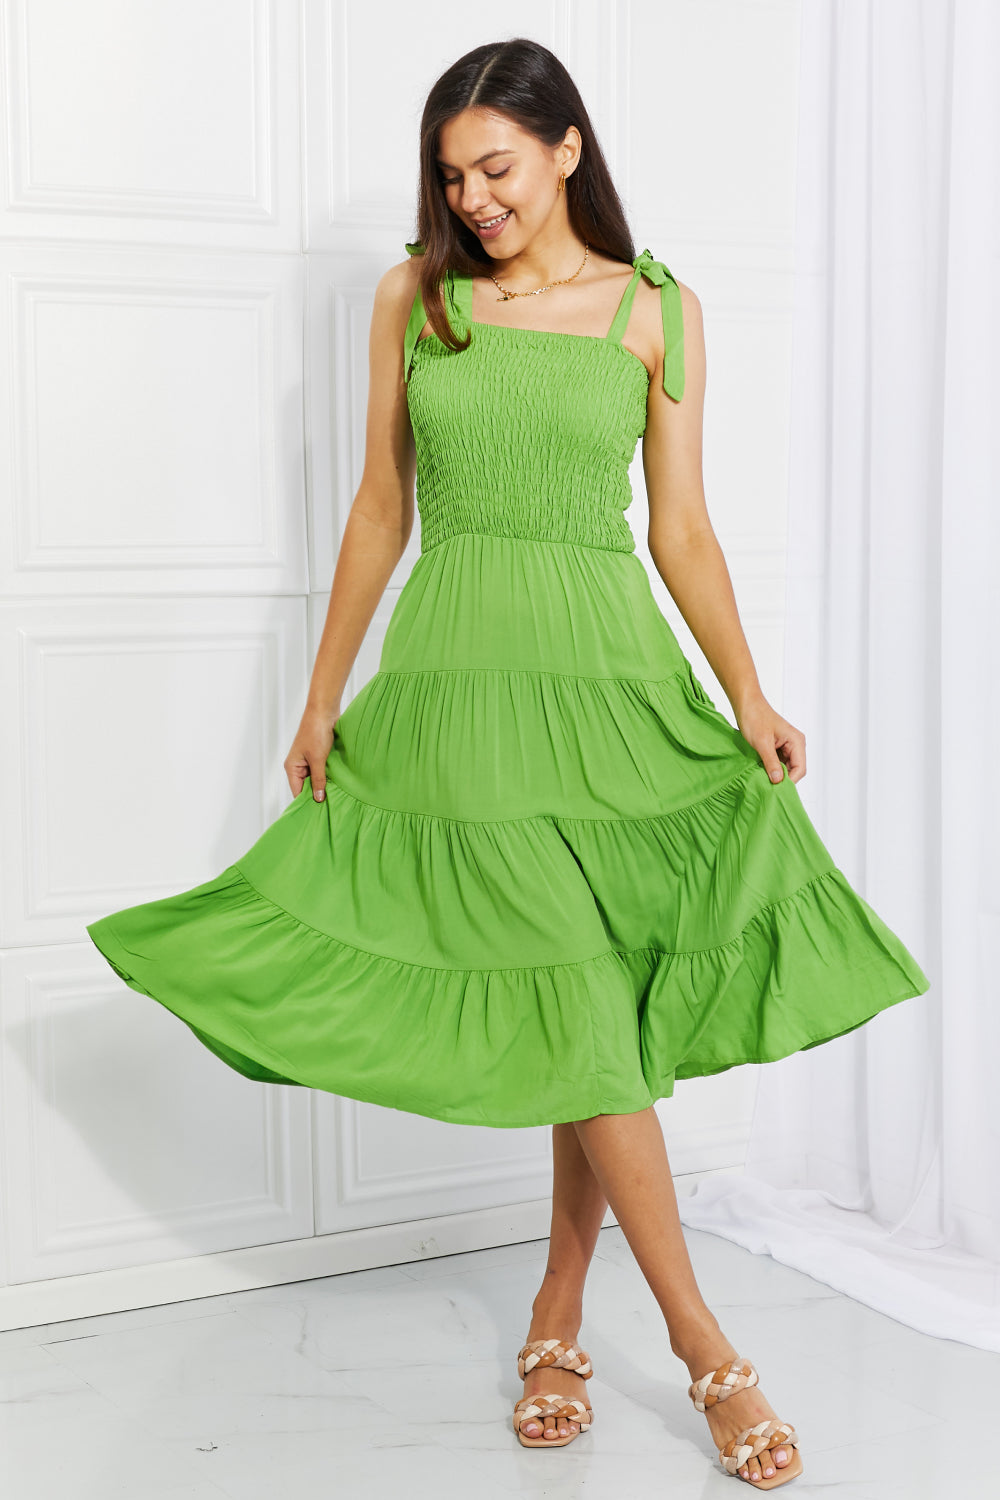 LIME - Culture Code Full Size Summer Solstice Smocked Tiered Dress - Ships from The US - womens dress at TFC&H Co.